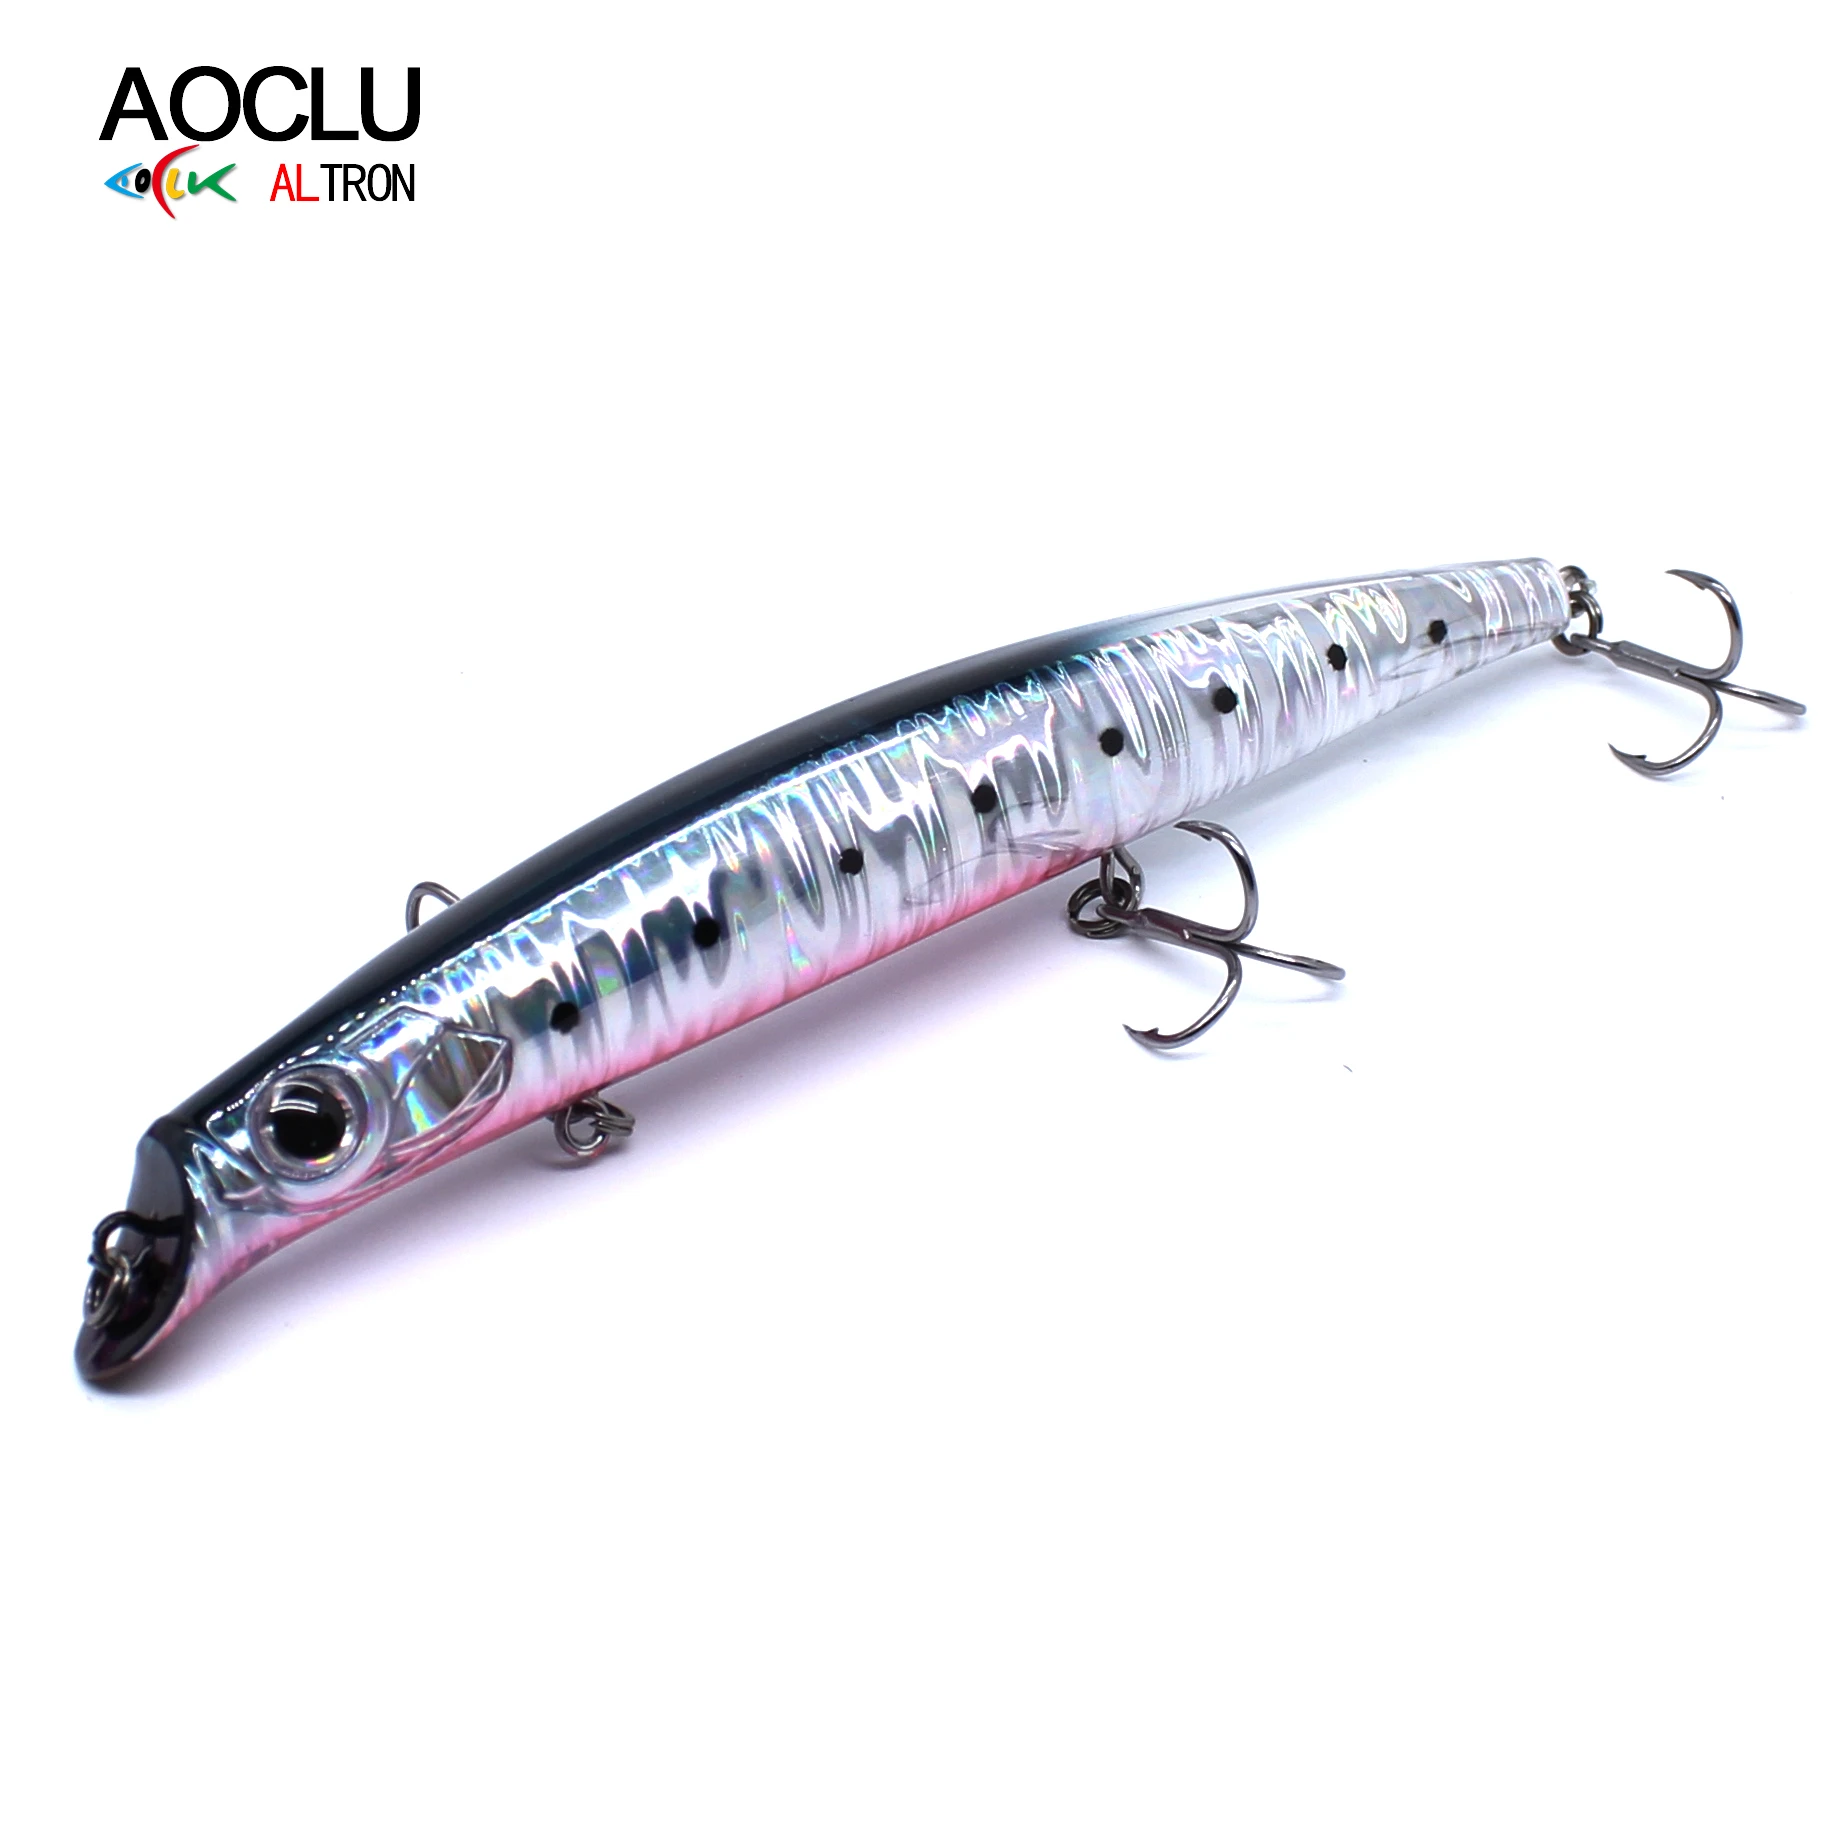 

AOCLU Jerkbait Wobblers 14cm 18g Depth 1m Hard Bait Minnow Stick Floating Fishing Lures Weight Transfer System Long Casting